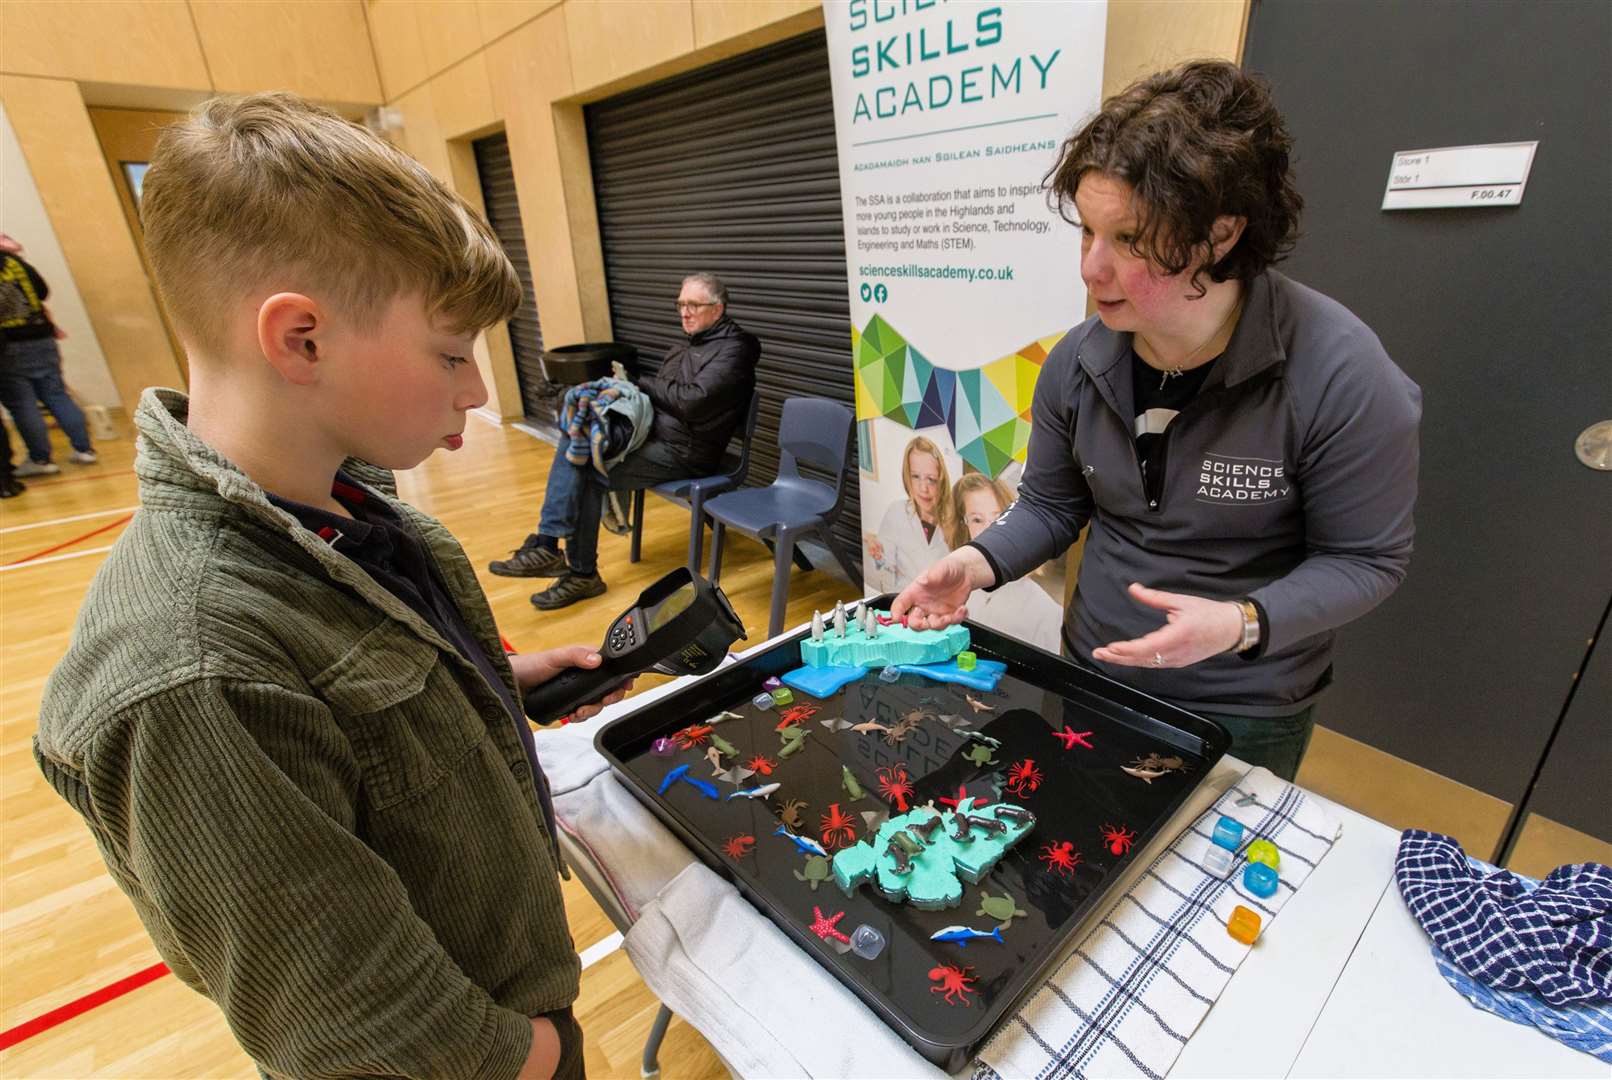 Camden Hollick from Thurso visits the Science Skills Academy stand where Aileen Simmonite from the Thurso Newton Room was on hand to answer his questions. Photo: Robert MacDonald/Northern Studios